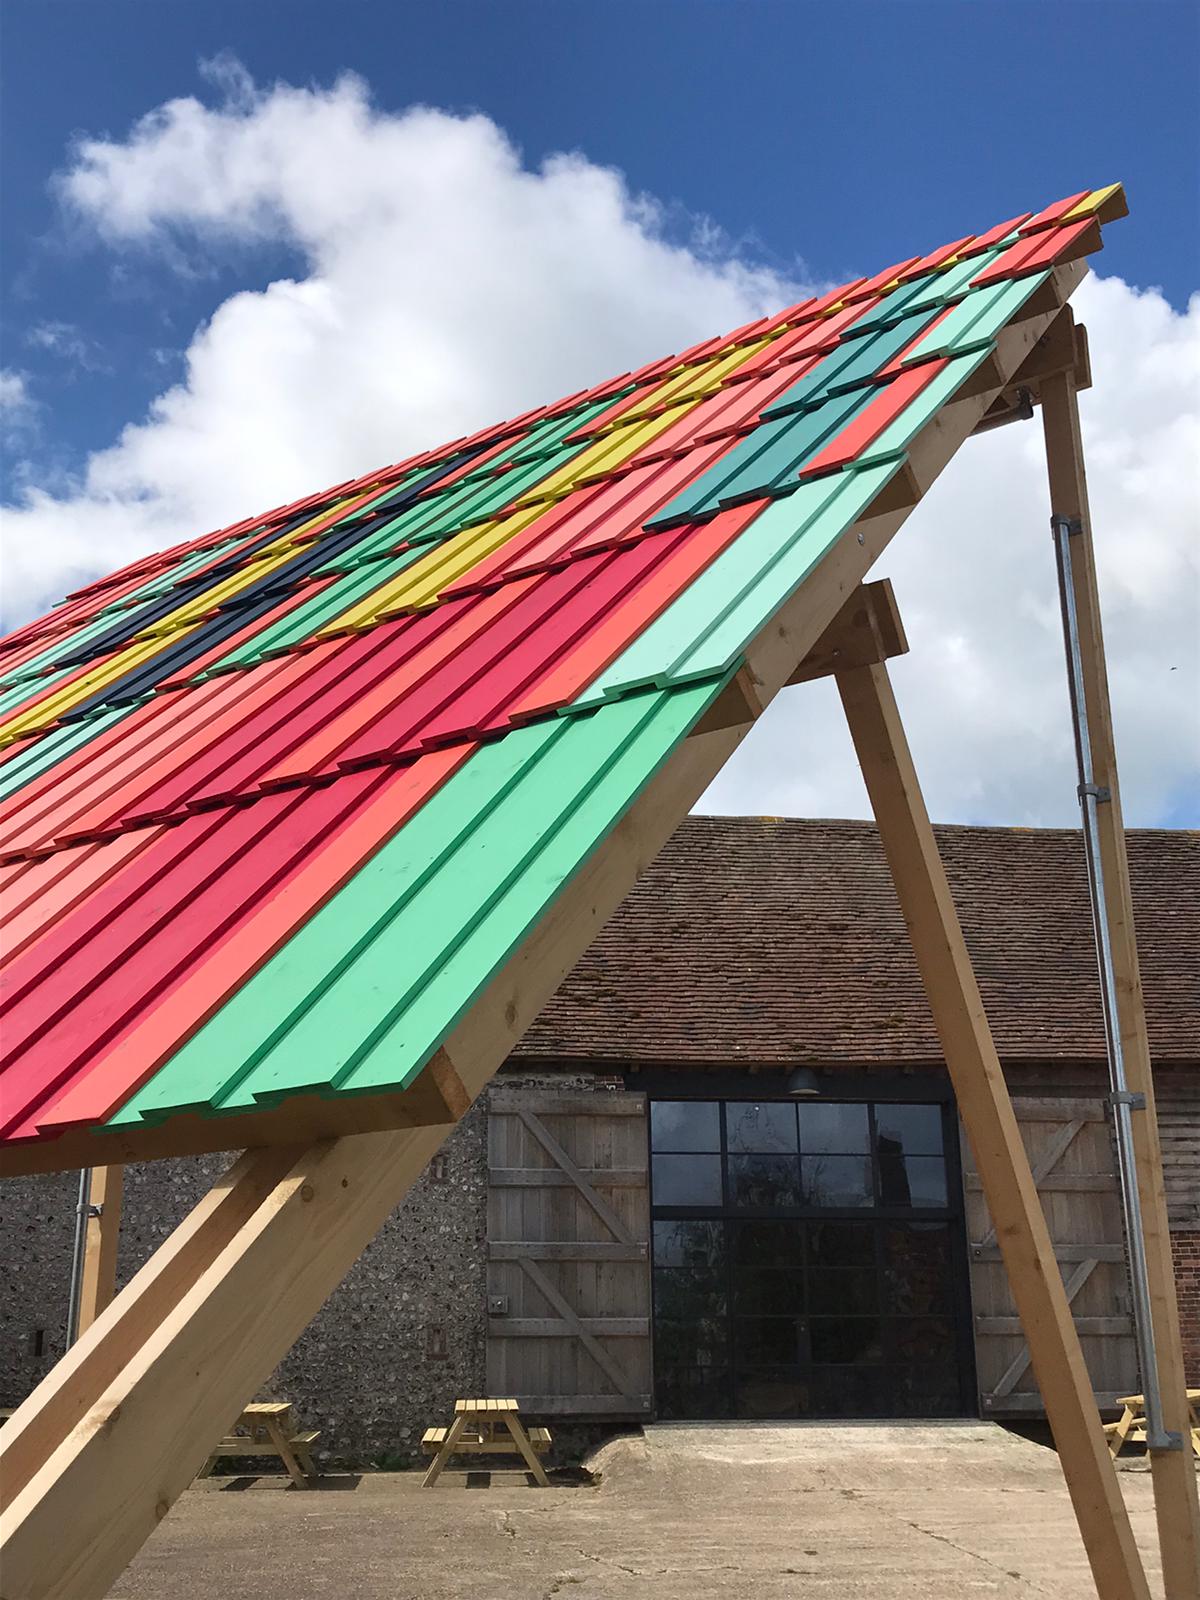 A photograph of a wooden construction - a multi-coloured outdoor stage